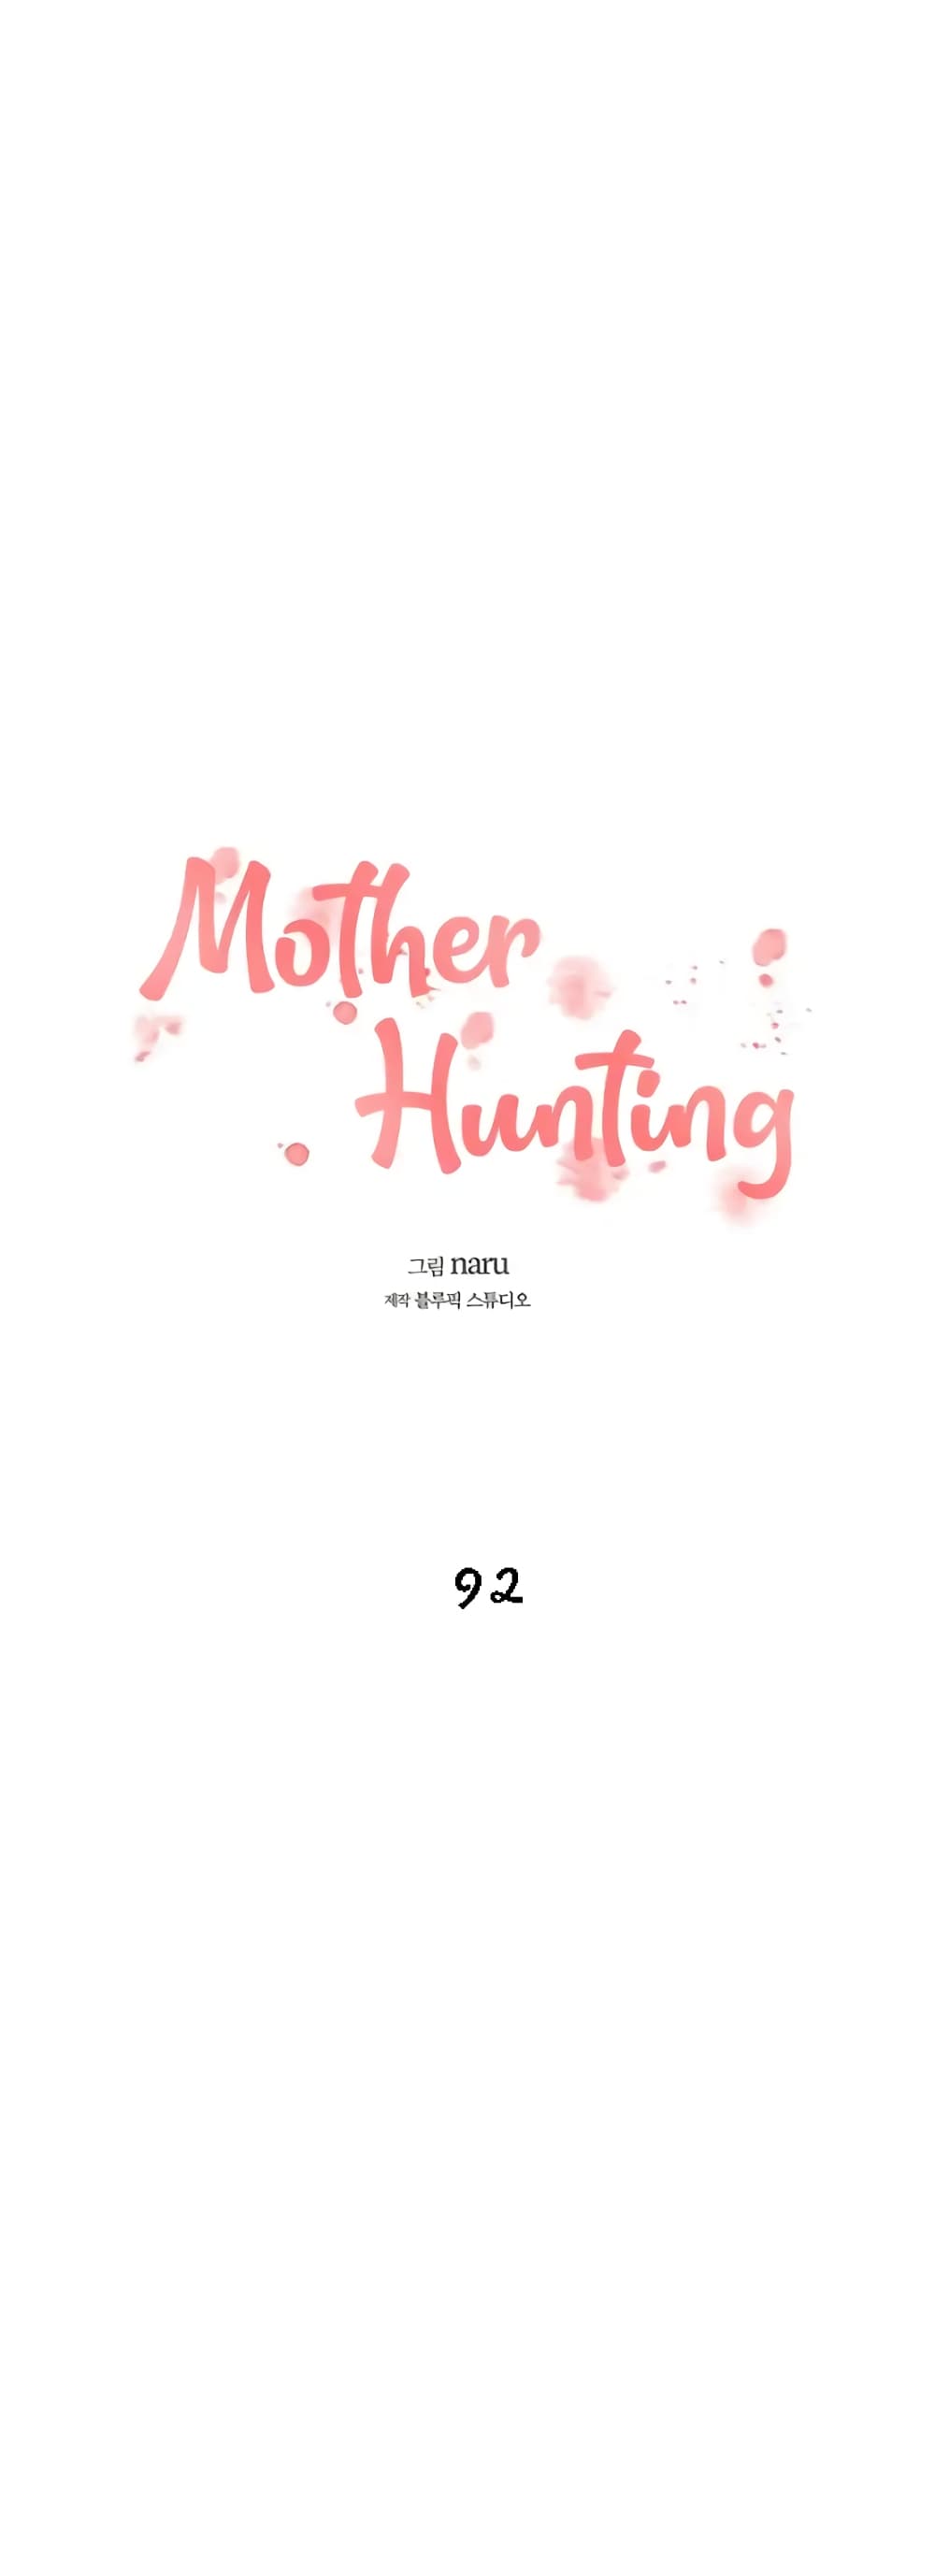 Mother Hunting 92-92